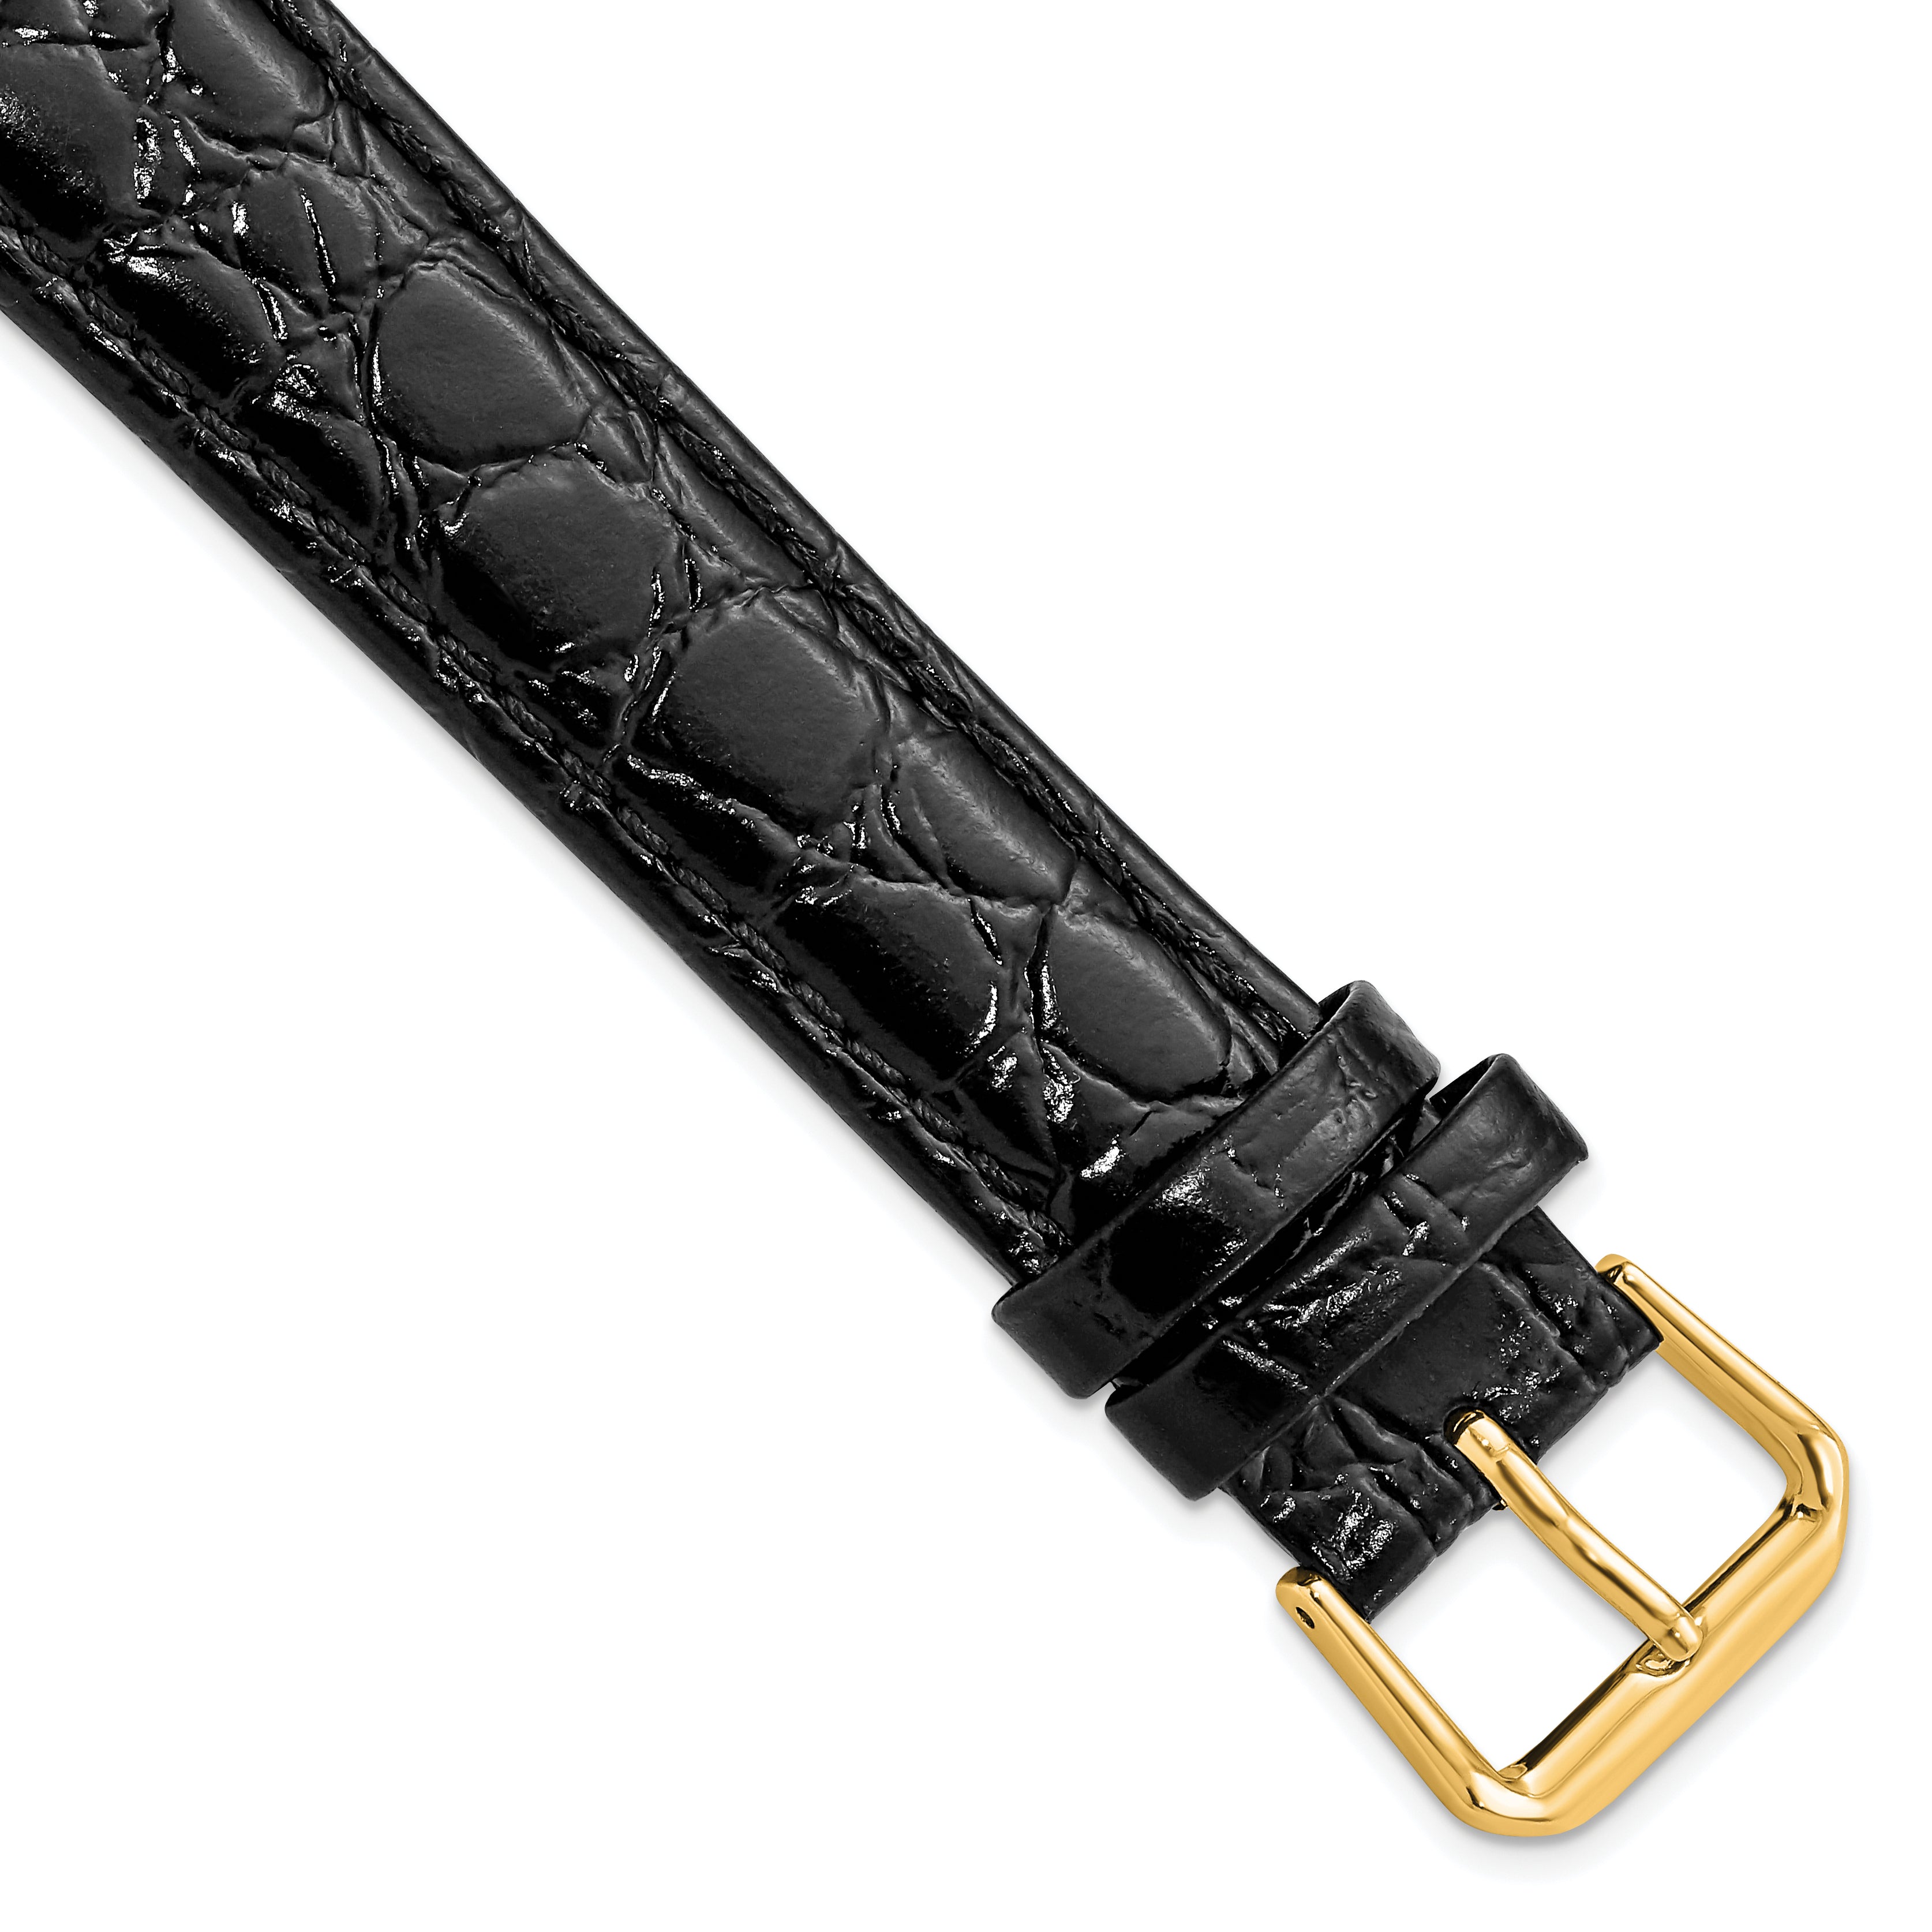 DeBeer 18mm Long Black Alligator Grain Leather with Gold-tone Buckle 8.5 inch Watch Band